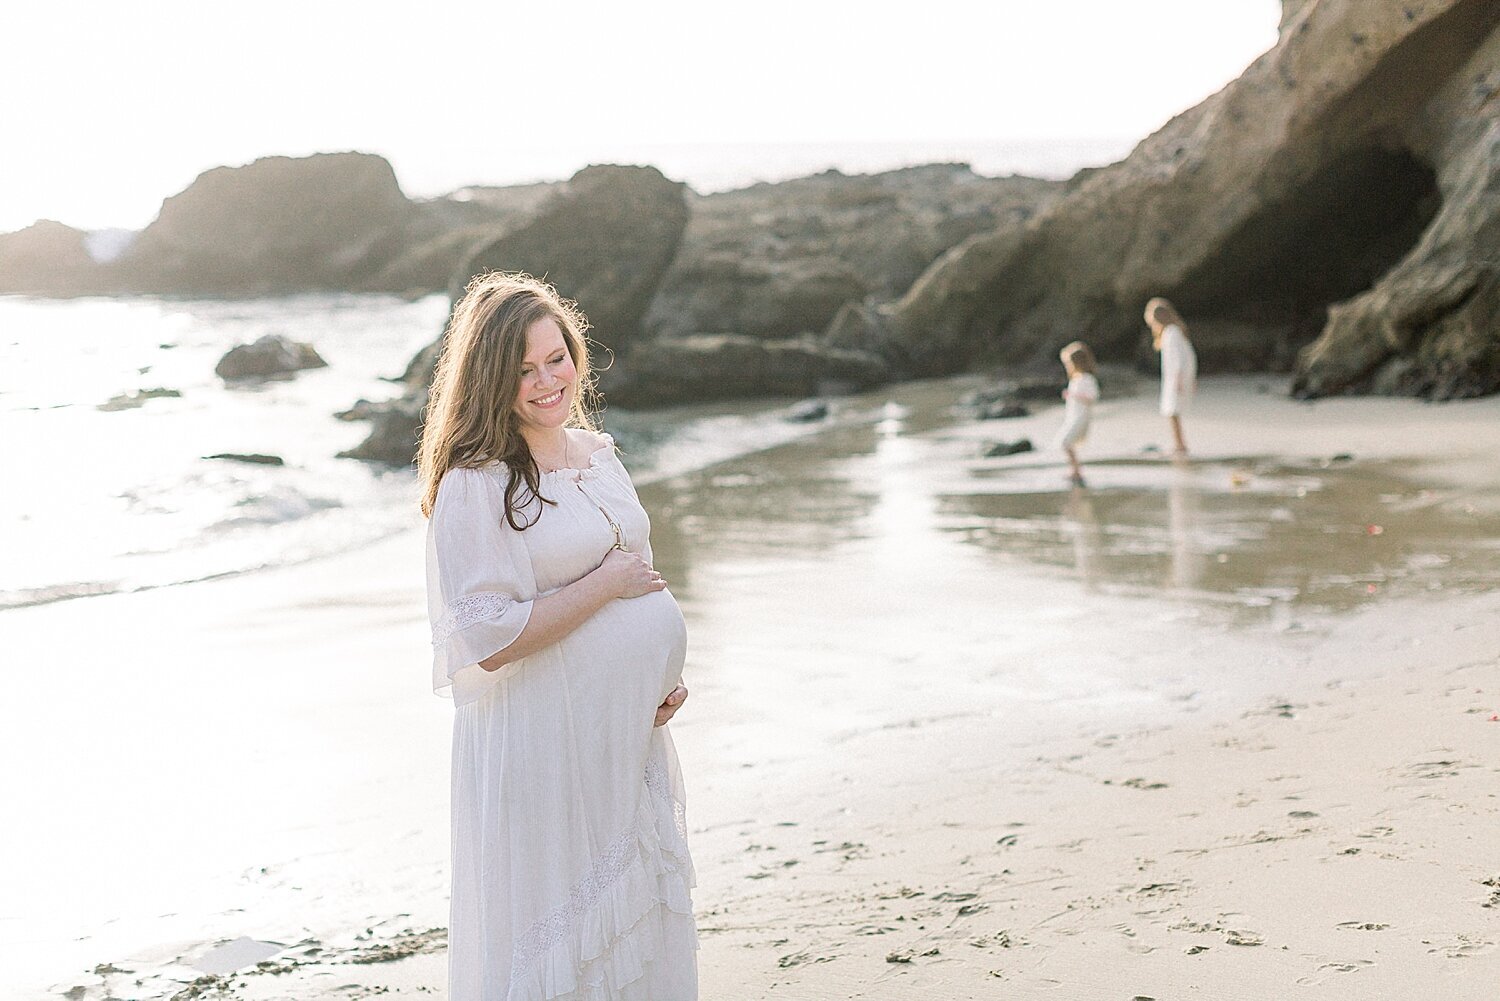 Sunset maternity session at Corona del Mar in Southern California. Photos by Ambre Williams Photography.